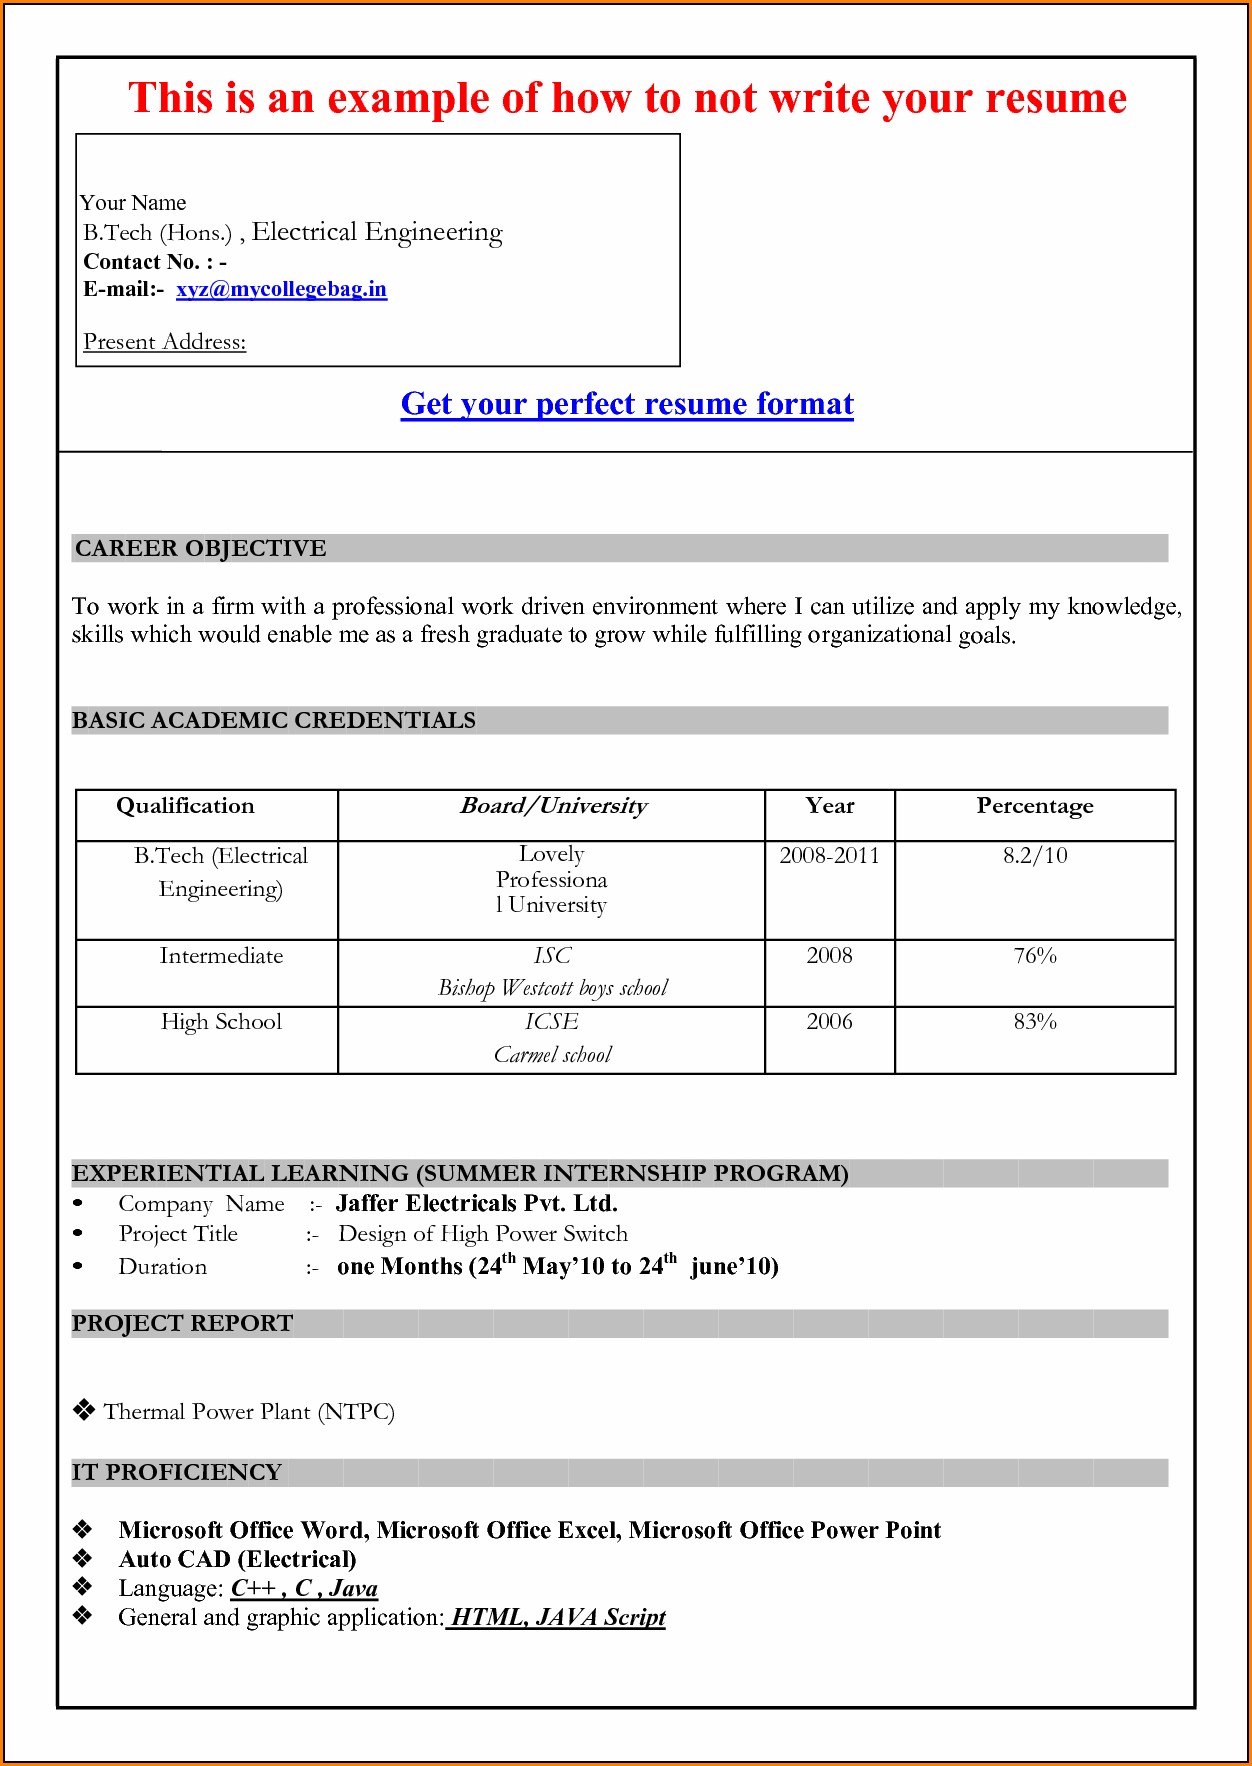 Resume Format Free Download In Ms Word 2007